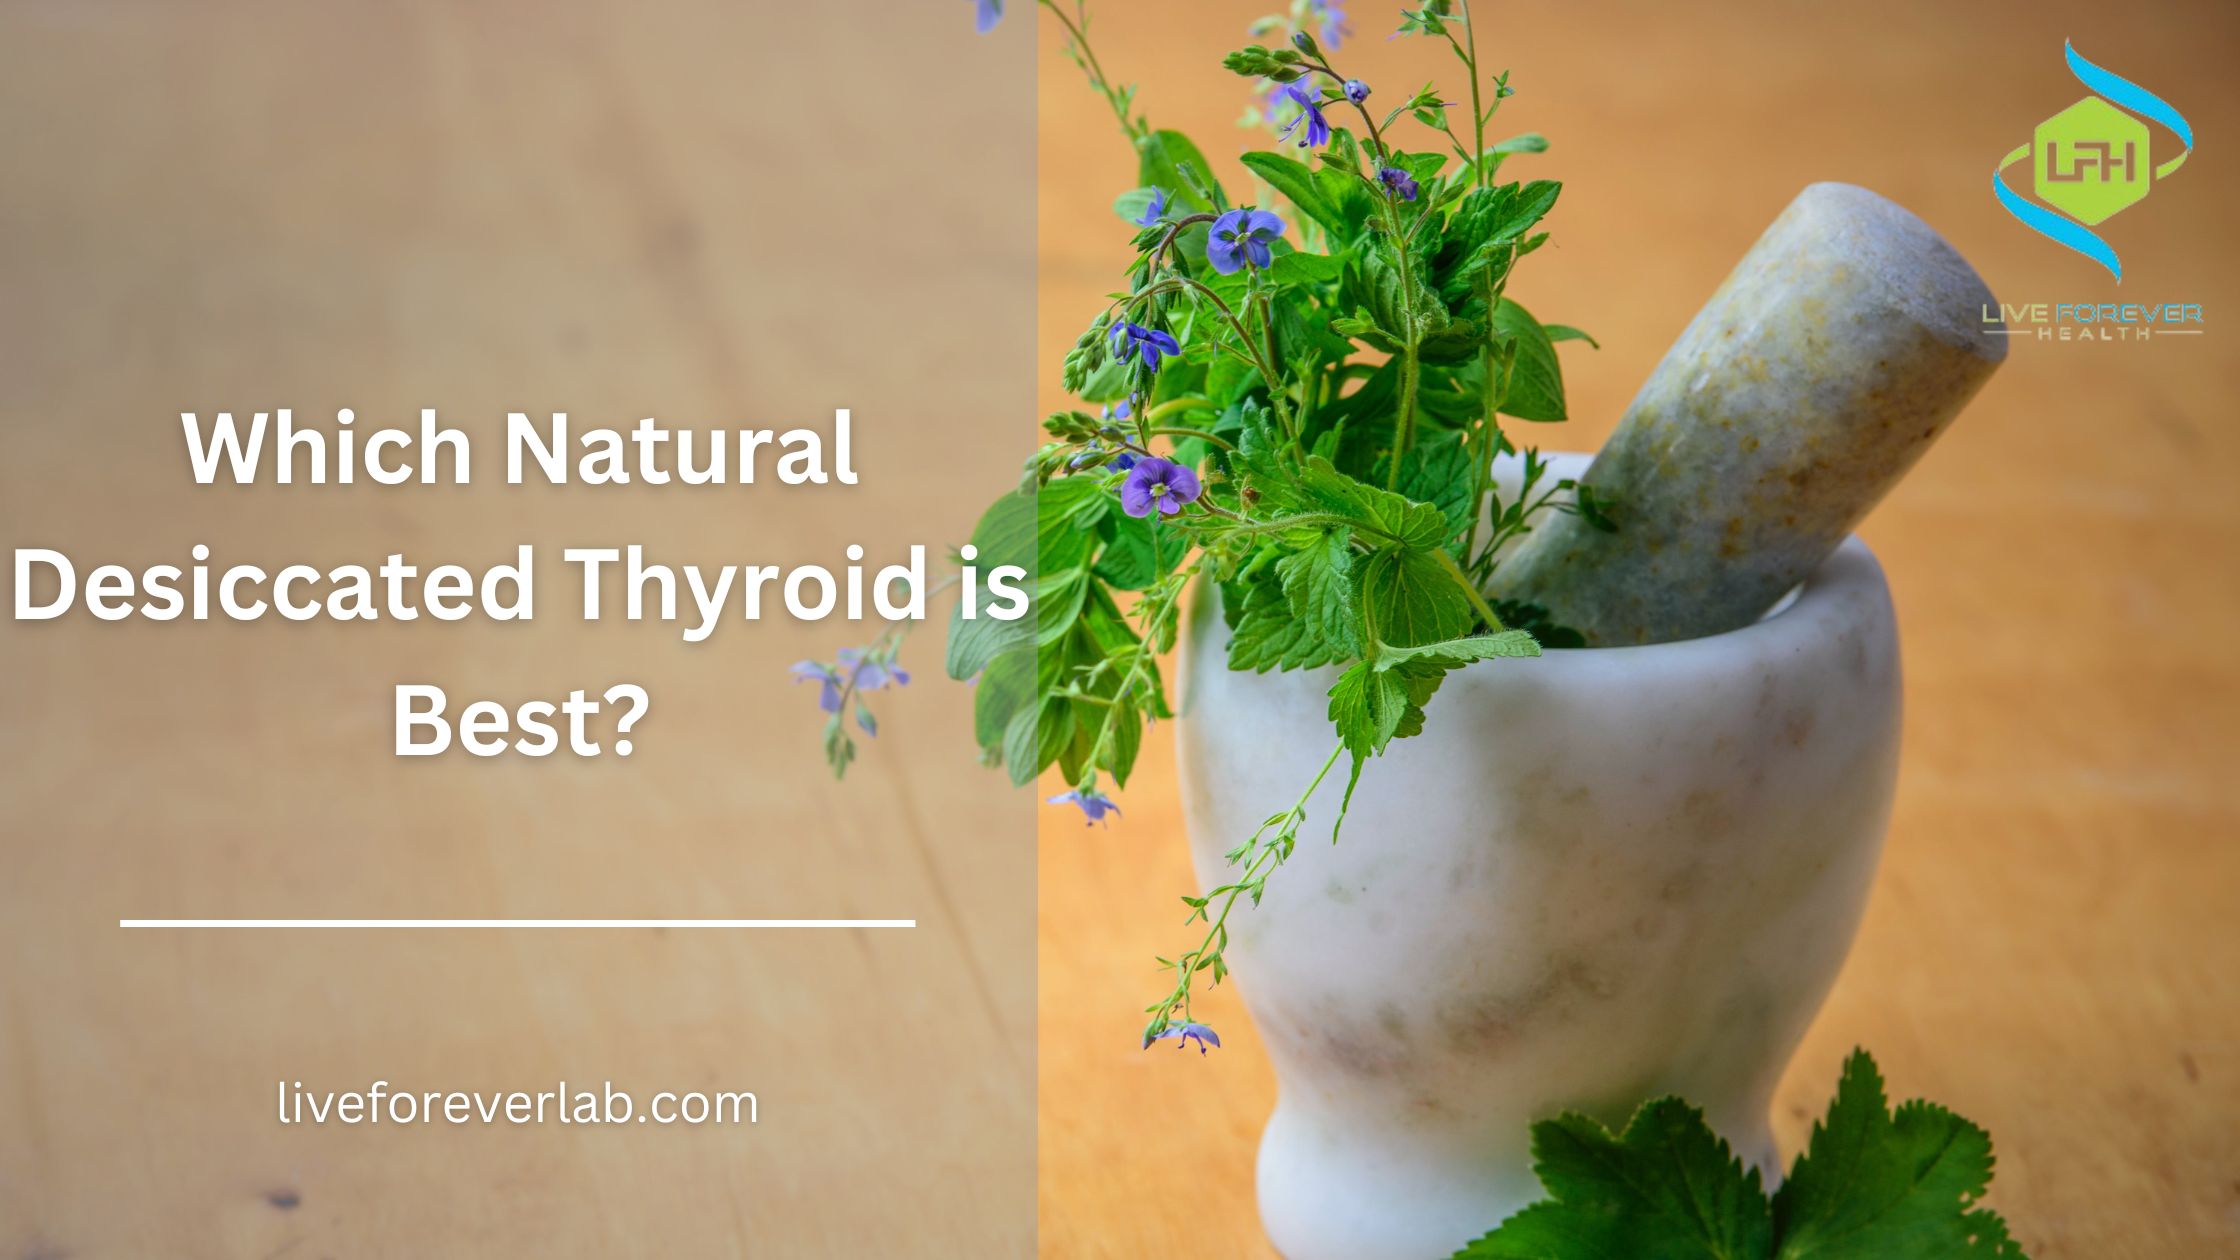 which natural desiccated thyroid is best